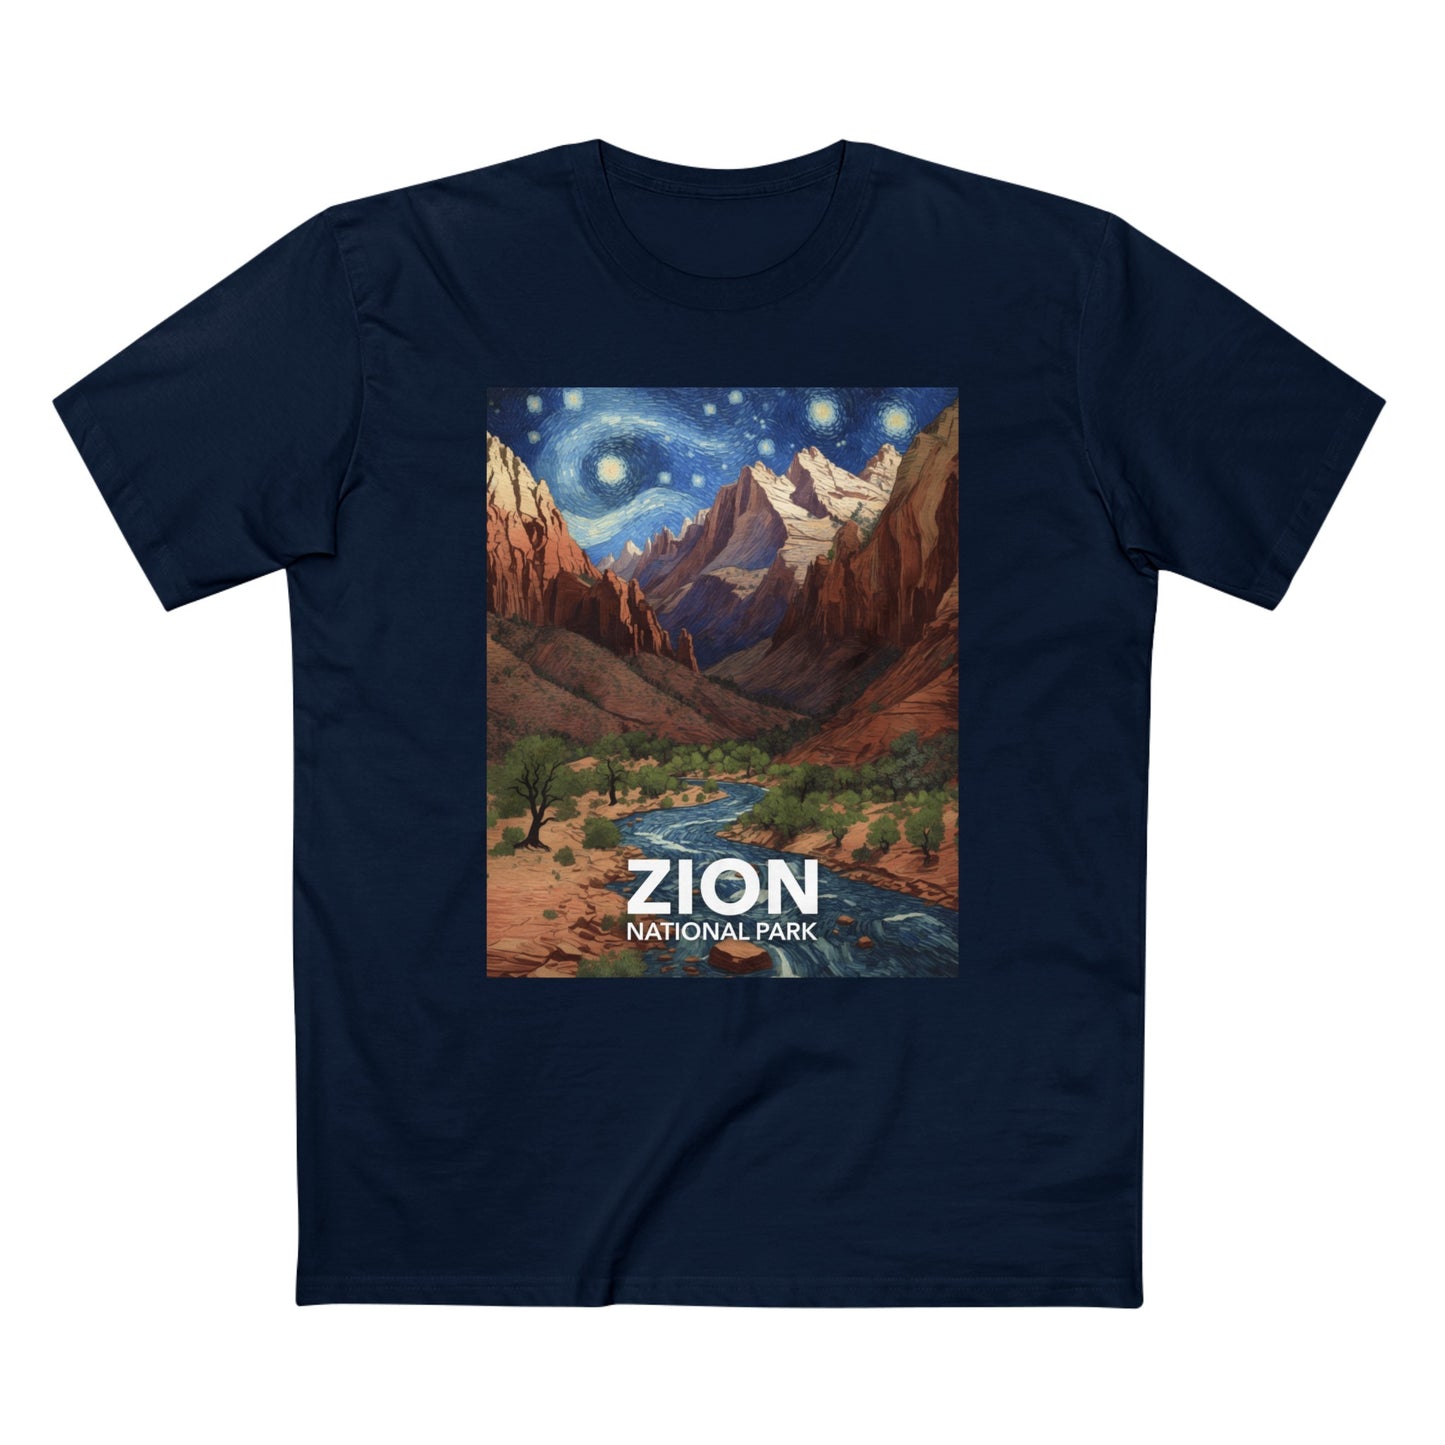 Zion National Park T-Shirt - The Starry Night